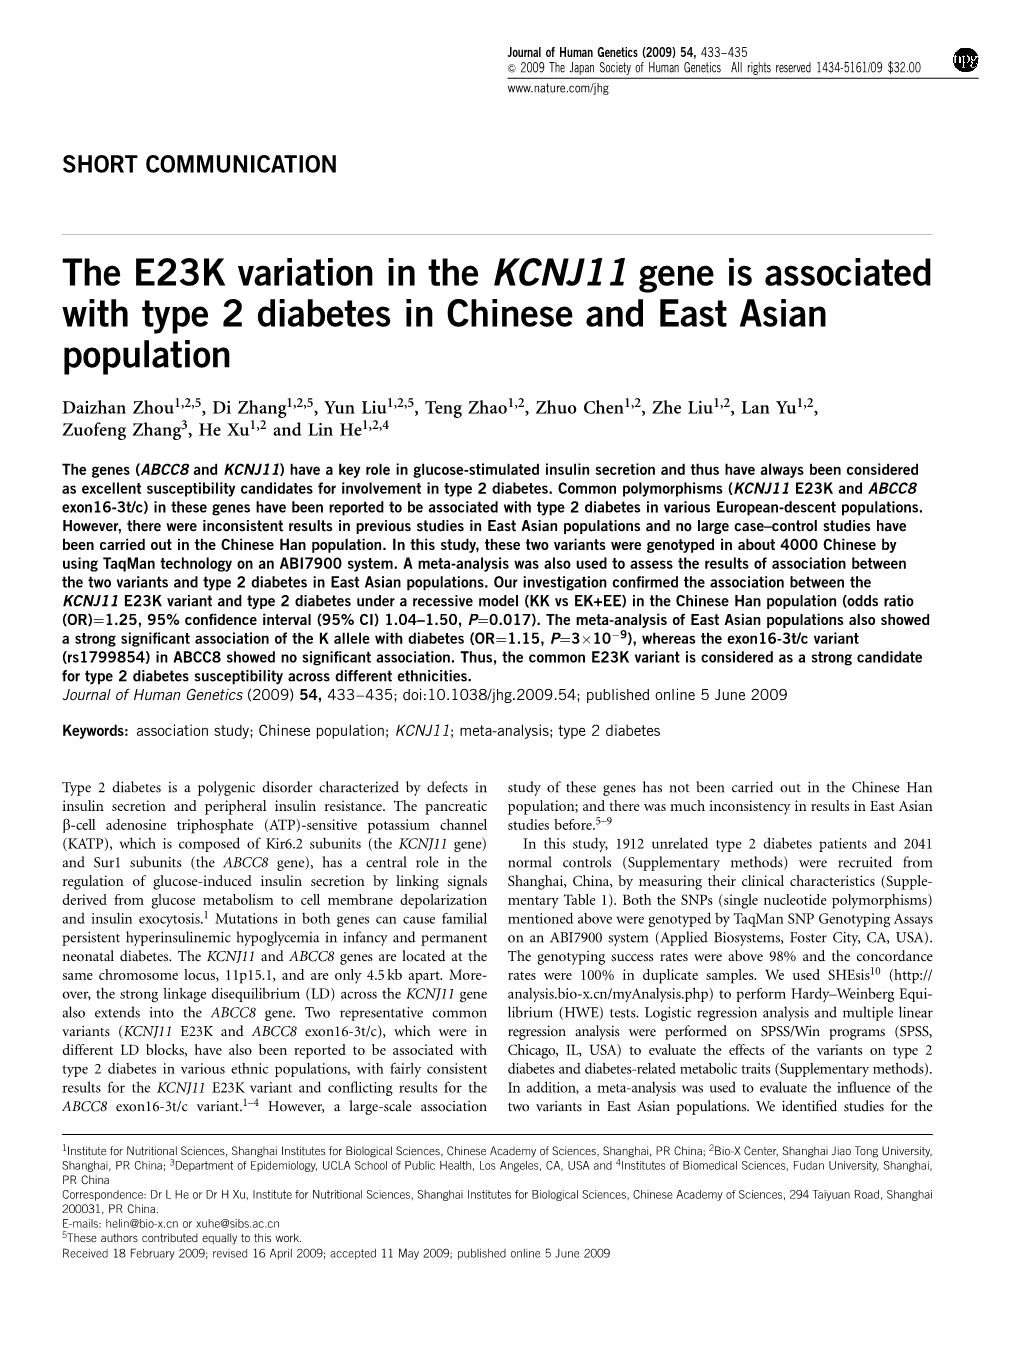 The E23K Variation in the KCNJ11 Gene Is Associated with Type 2 Diabetes in Chinese and East Asian Population